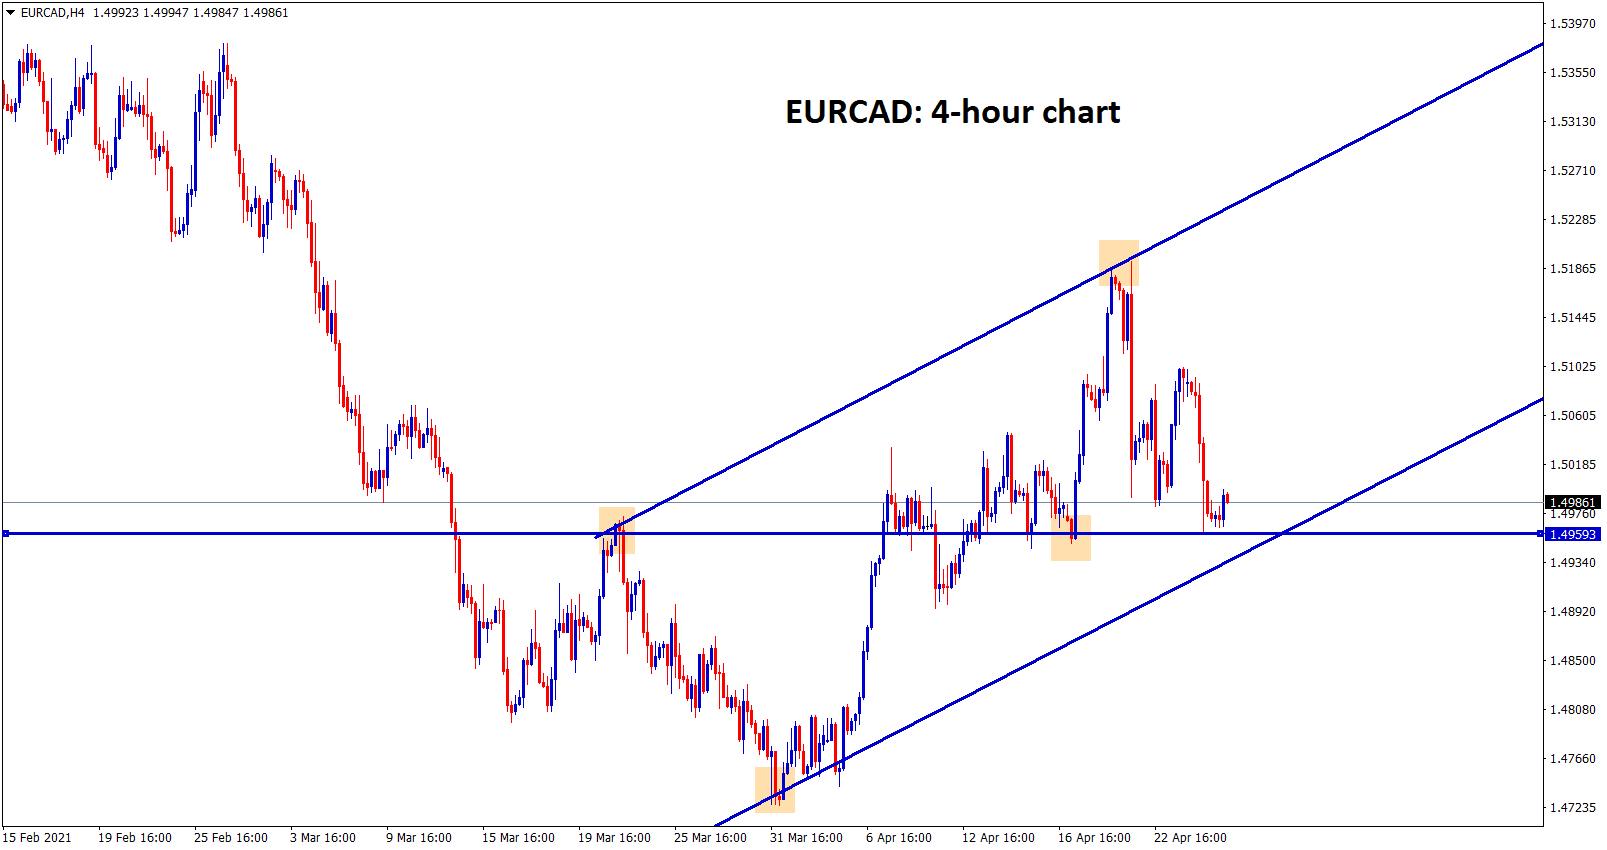 EURCAD at the support level and the higher low level of uptrend line